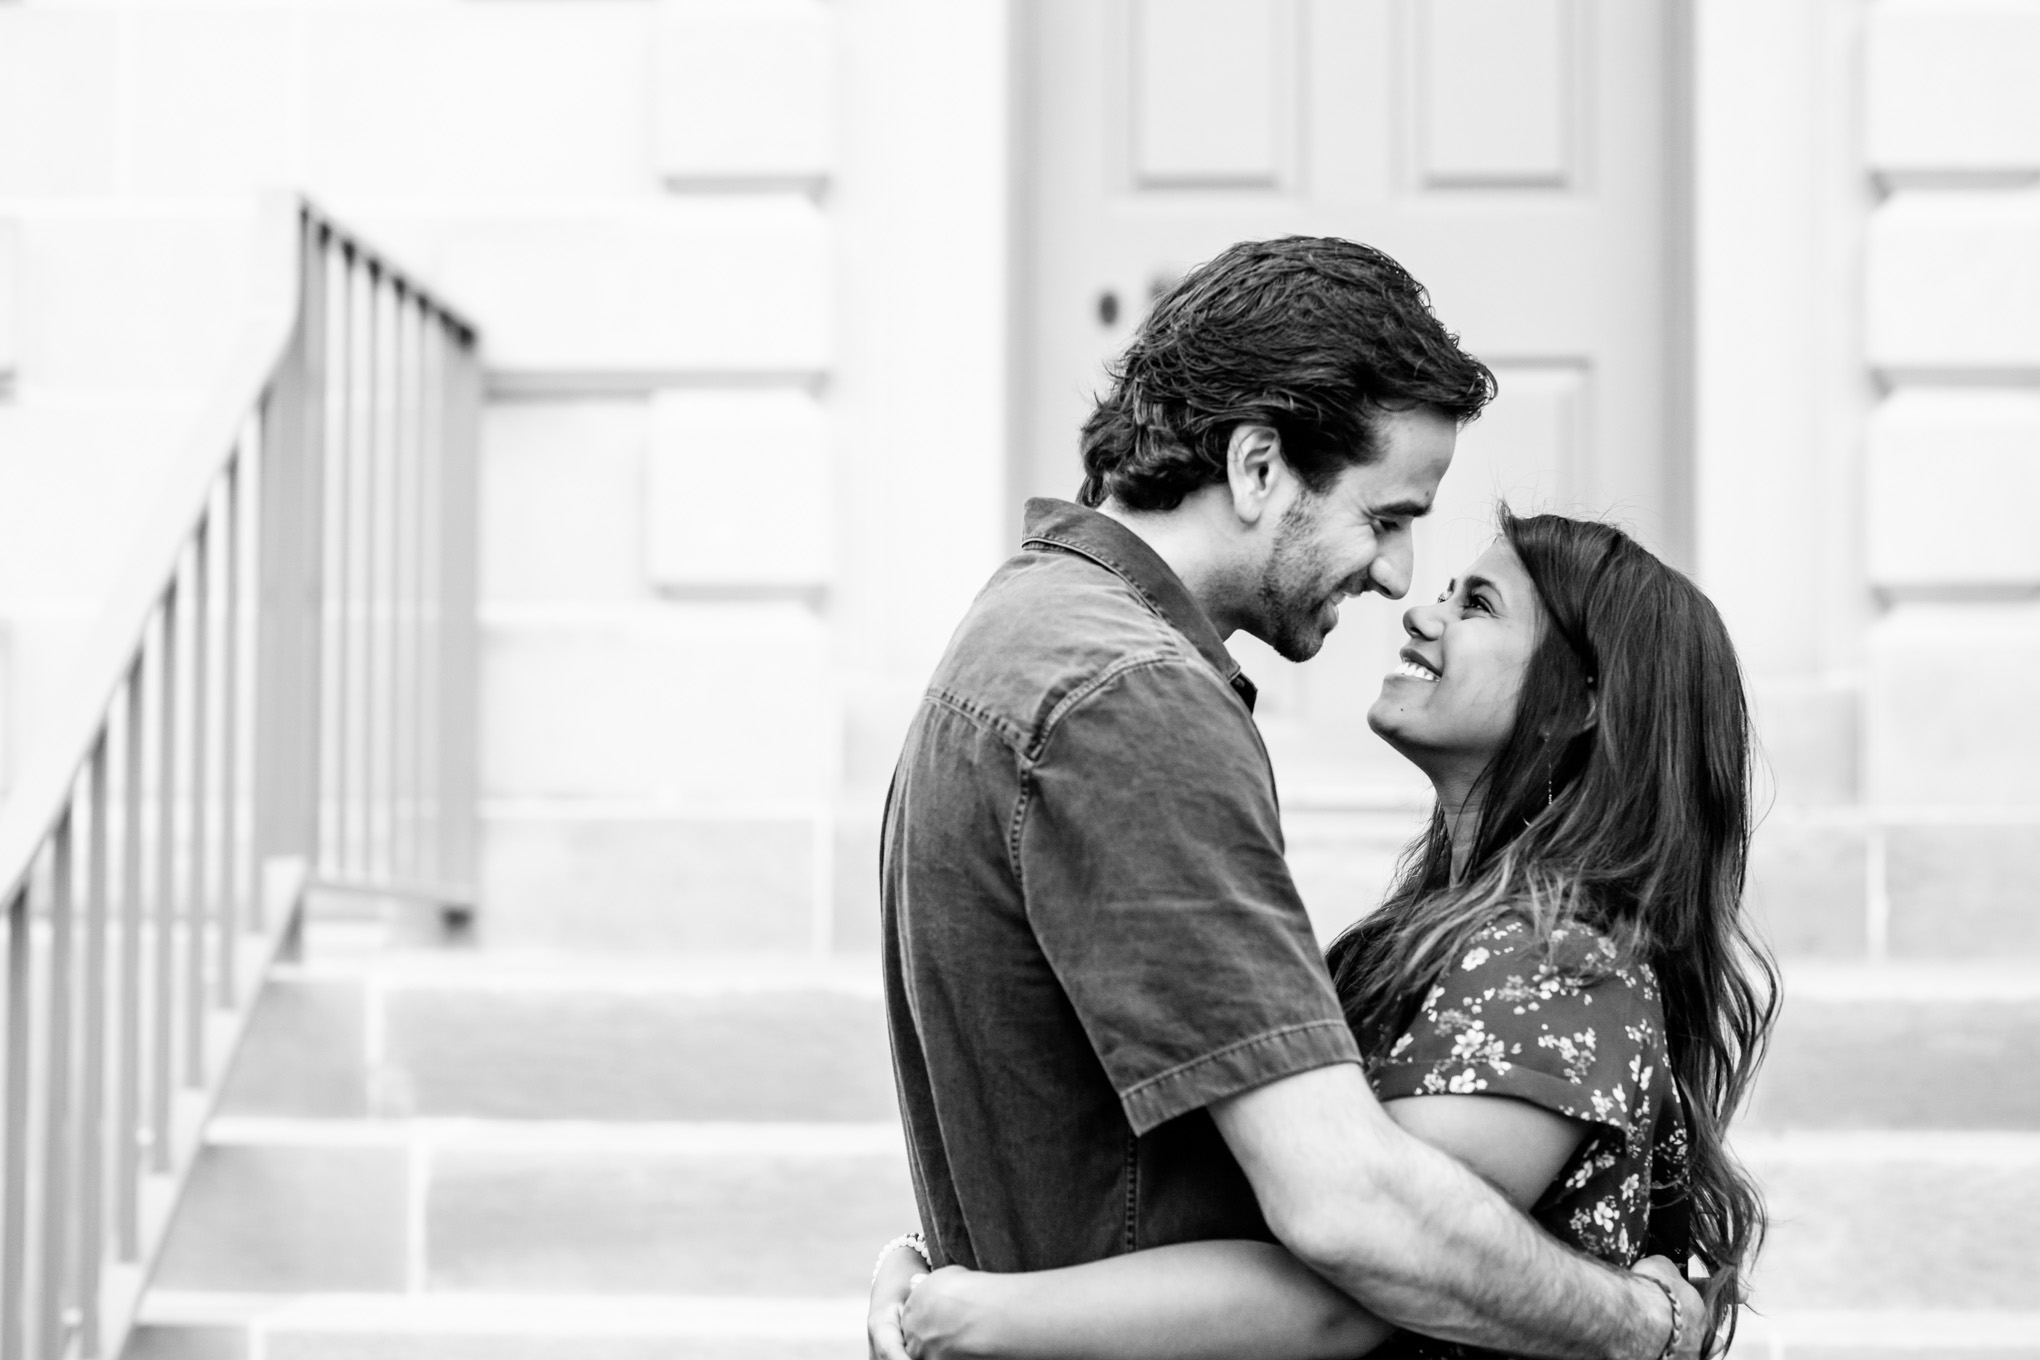 Old Town Alexandria engagement photos, Alexandria engagement photos, Old Town Alexandria photos, Old Town Alexandria, Alexandria engagement photos, Alexandria Virginia, classic engagement photos, historic town engagement photos, engagement photos, Rachel E.H. Photography, Carlyle House engagement photos, black and white engagement photo